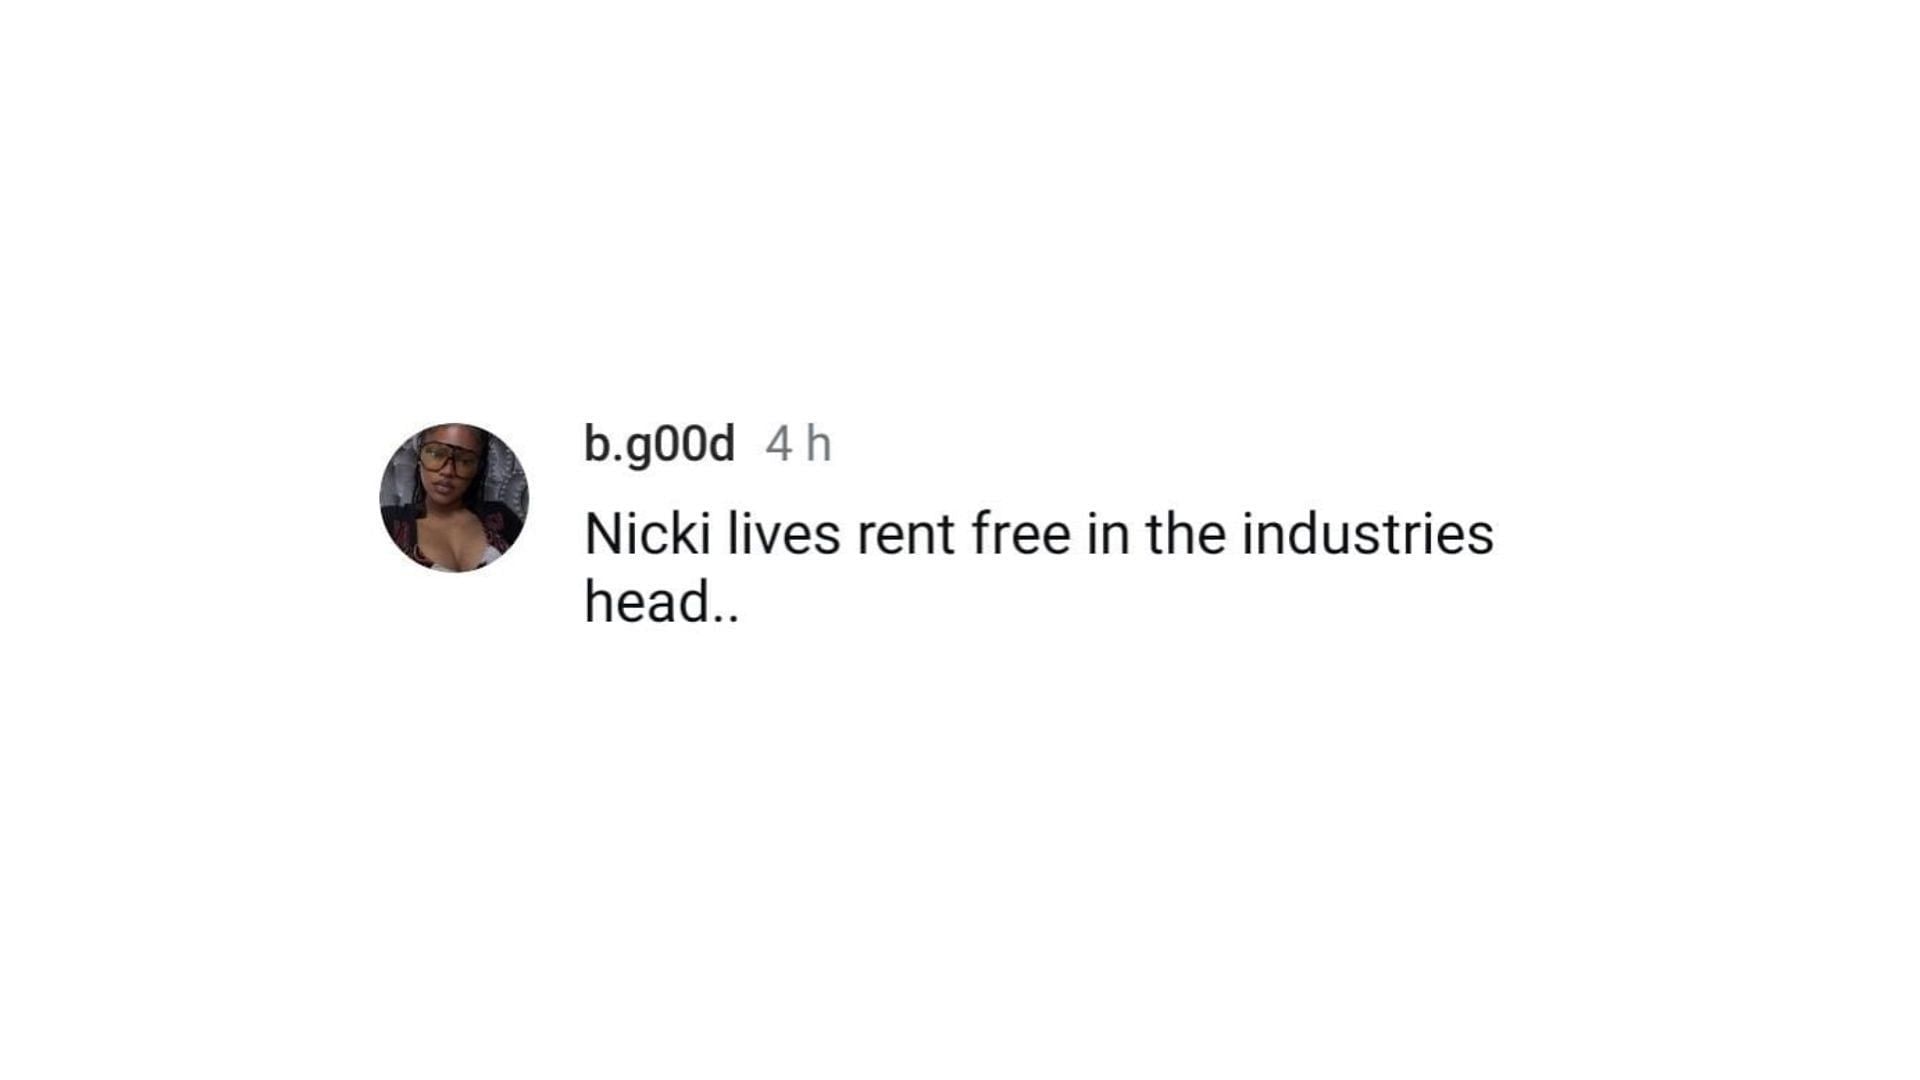 A Nicki Minaj fan points out how the rapper lives &quot;rent-free&quot; in everyone&#039;s minds. (Image via Instagram/ b.g00d)